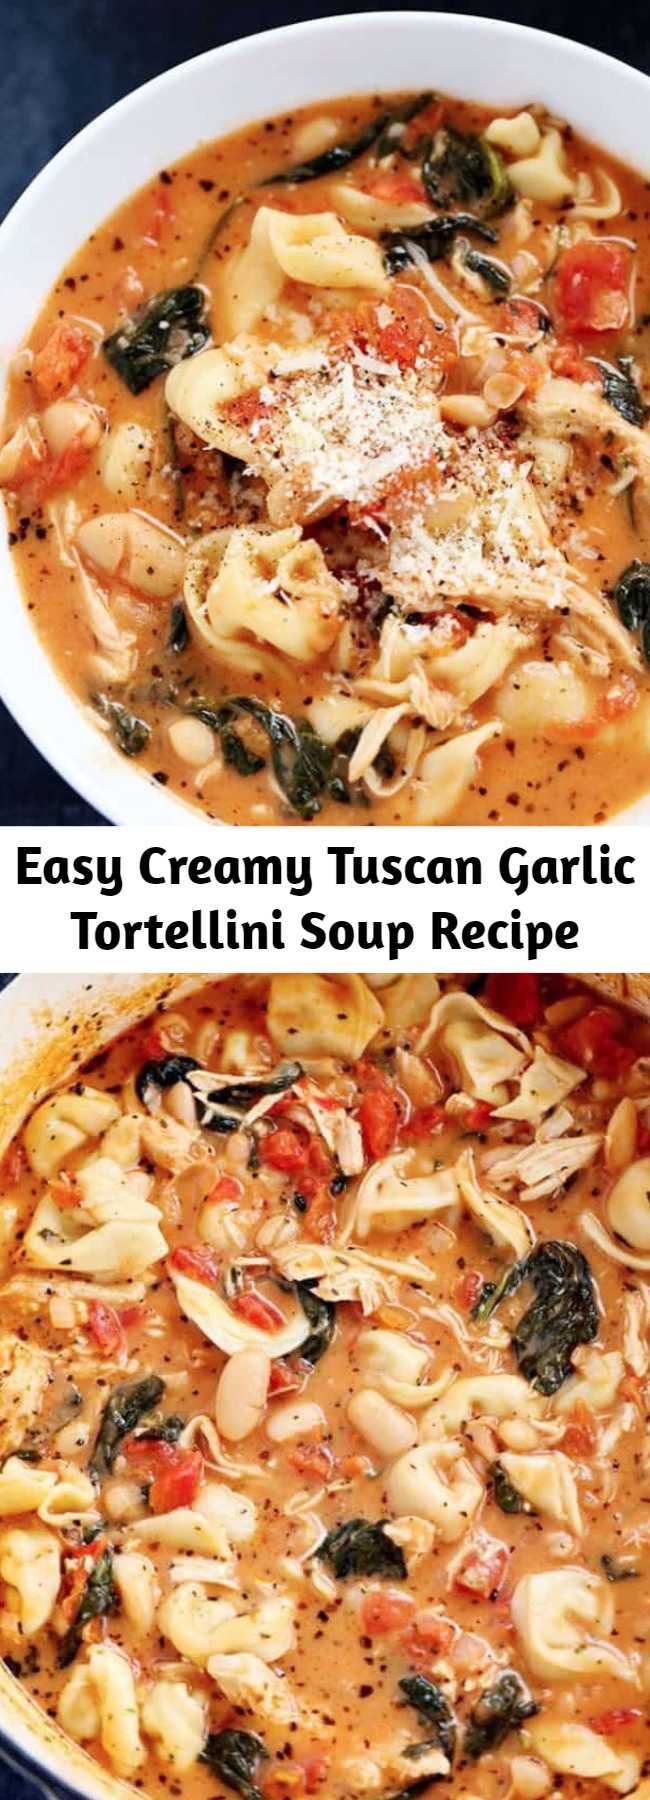 Easy Creamy Tuscan Garlic Tortellini Soup Recipe - Creamy Tuscan Garlic Tortellini Soup is so easy to make and one of the best soups that you will make! Tortellini, diced tomatoes spinach and white beans are hidden is the most creamy and delicious soup that your family will love!